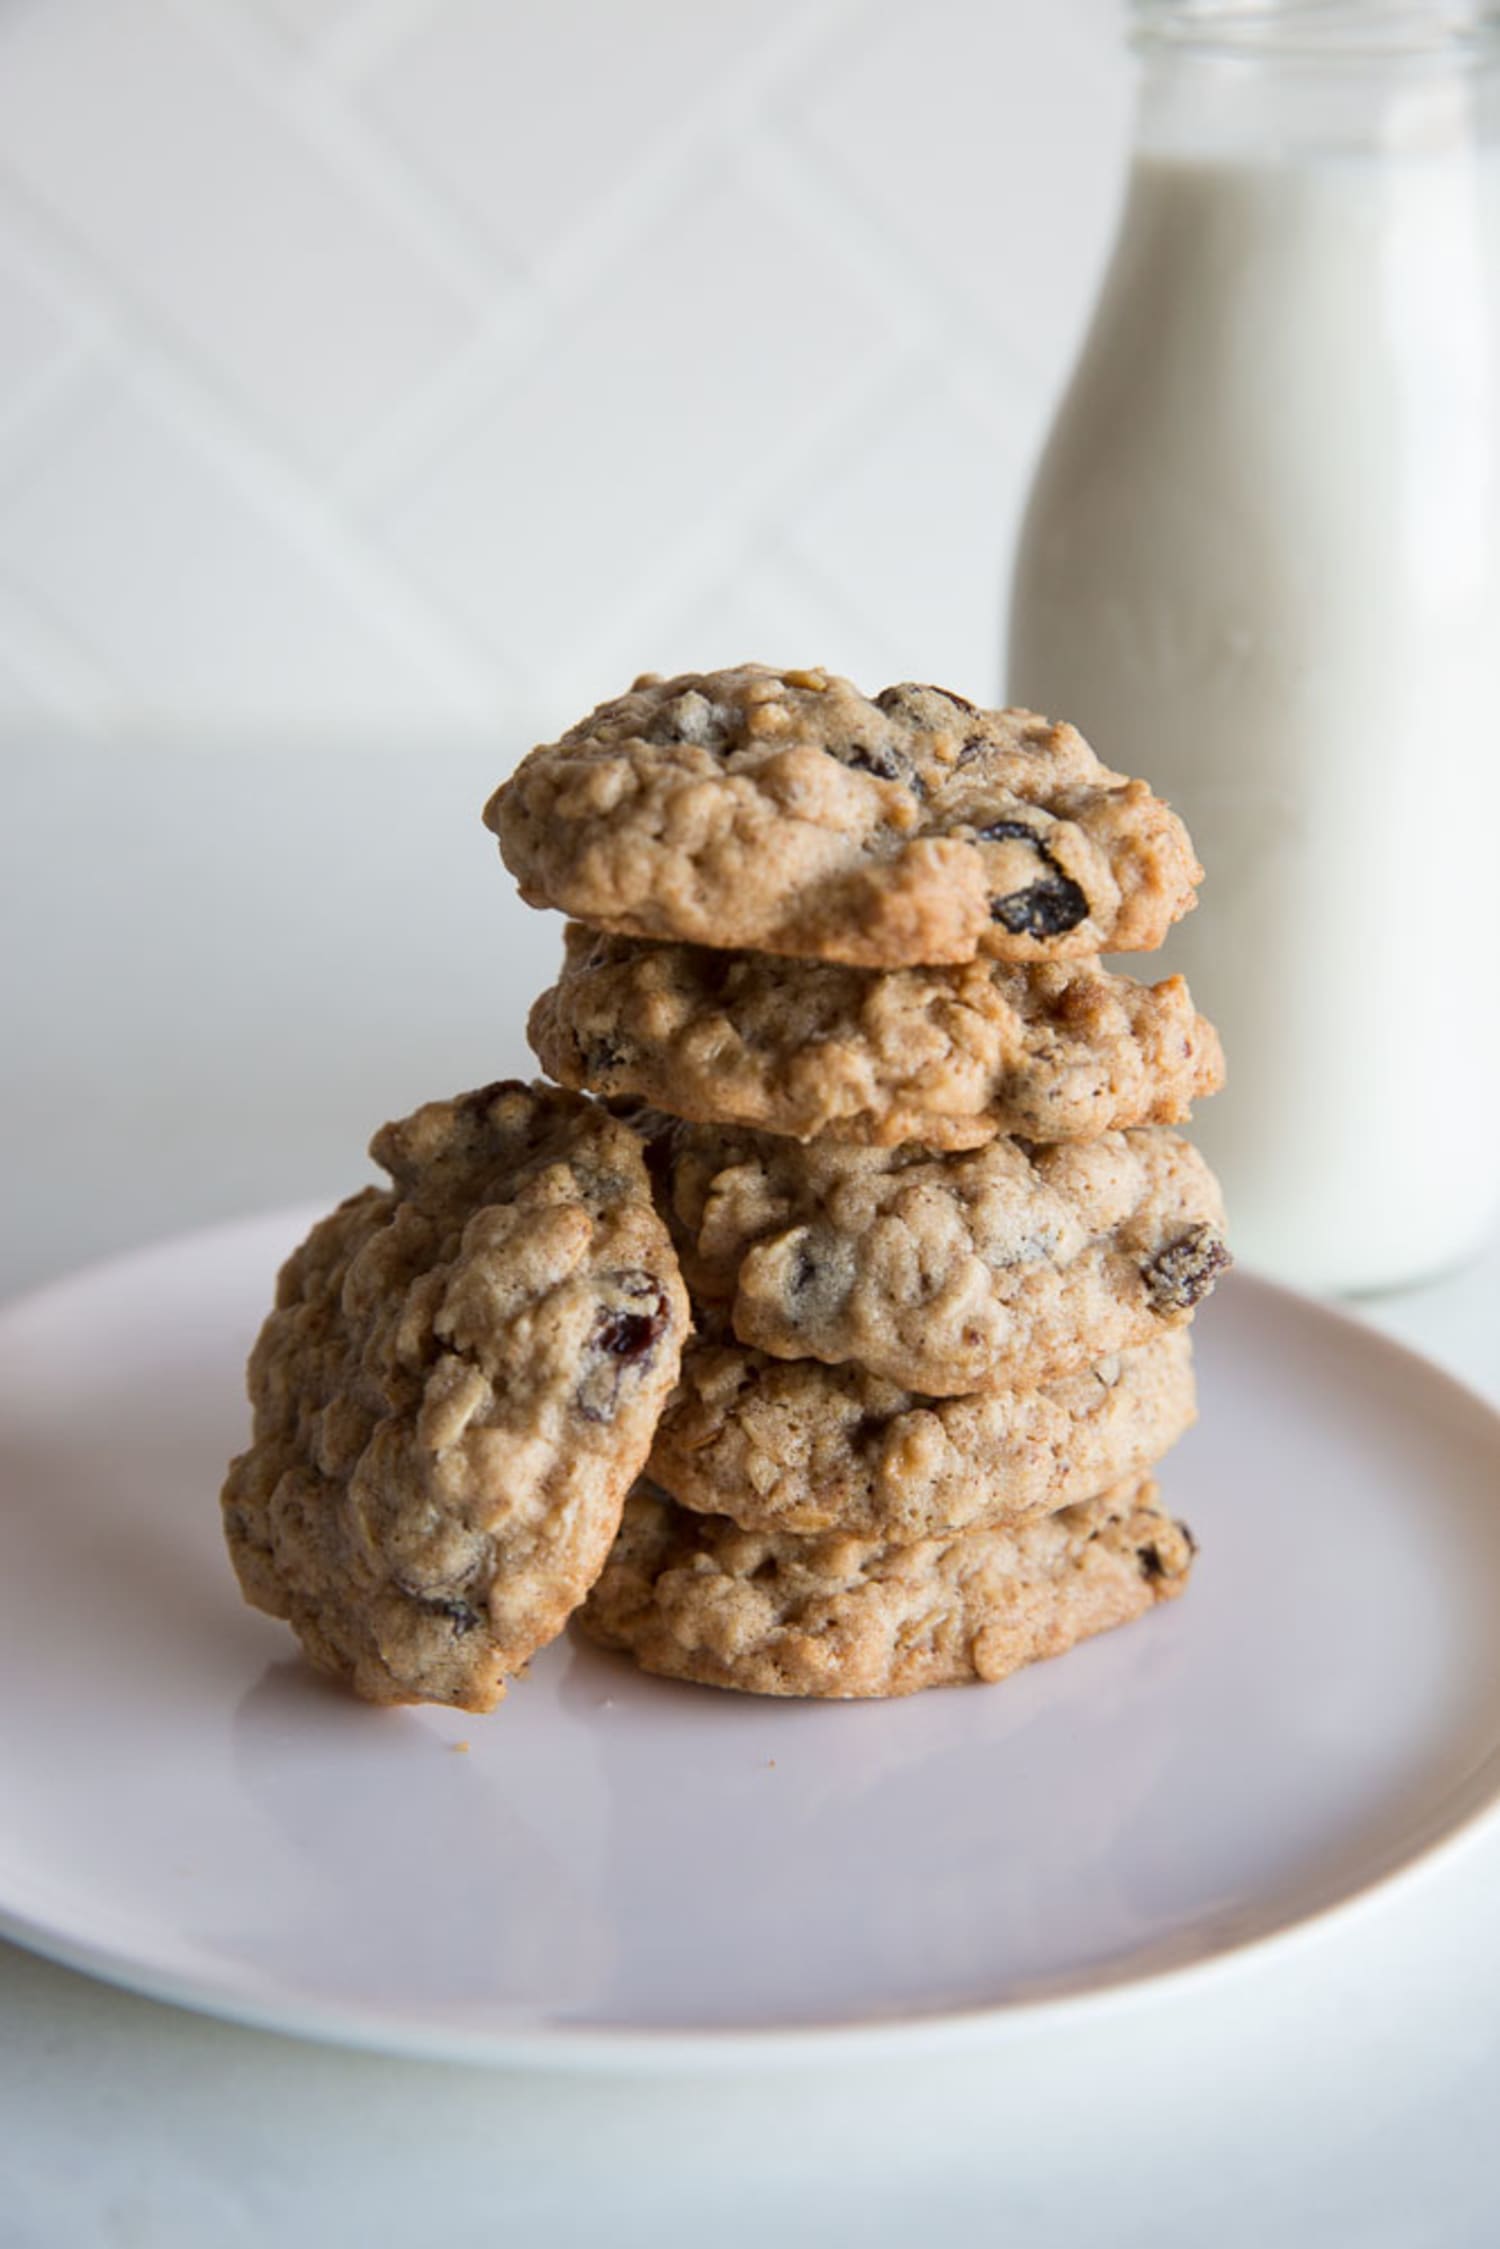 How To Make Soft & Chewy Oatmeal Cookies | Kitchn